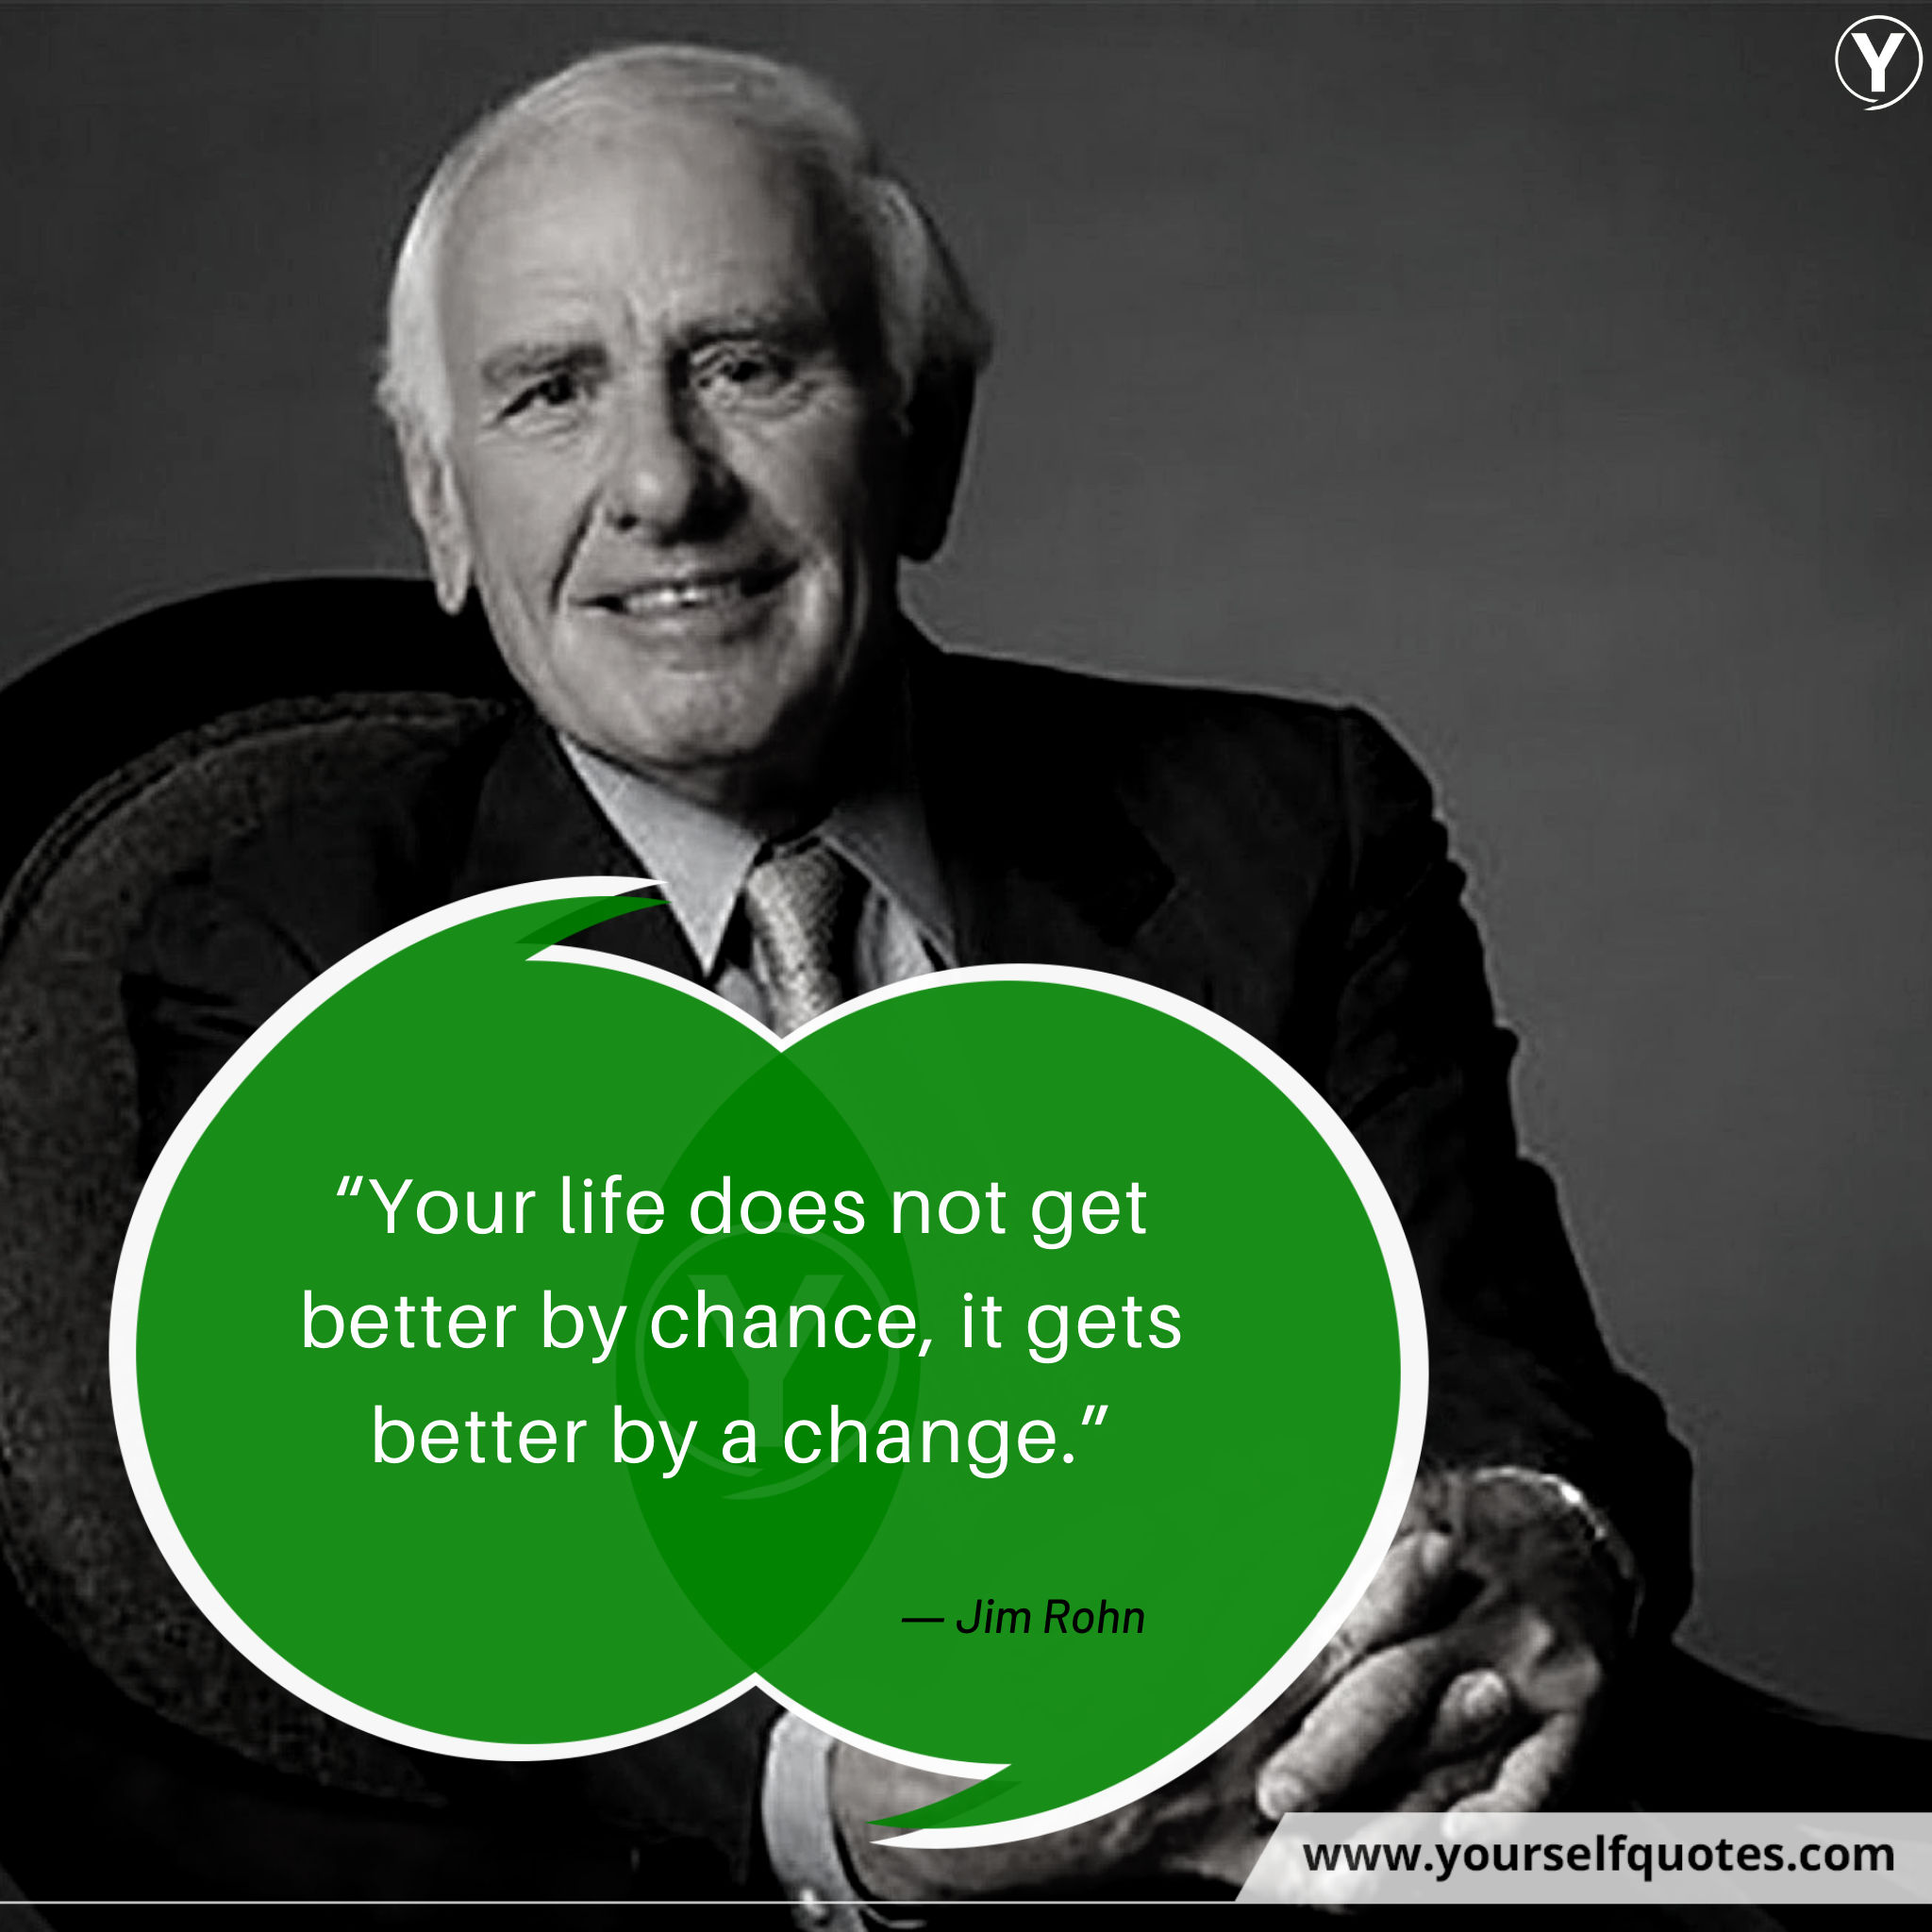 Quotes on Life by Jim Rohn